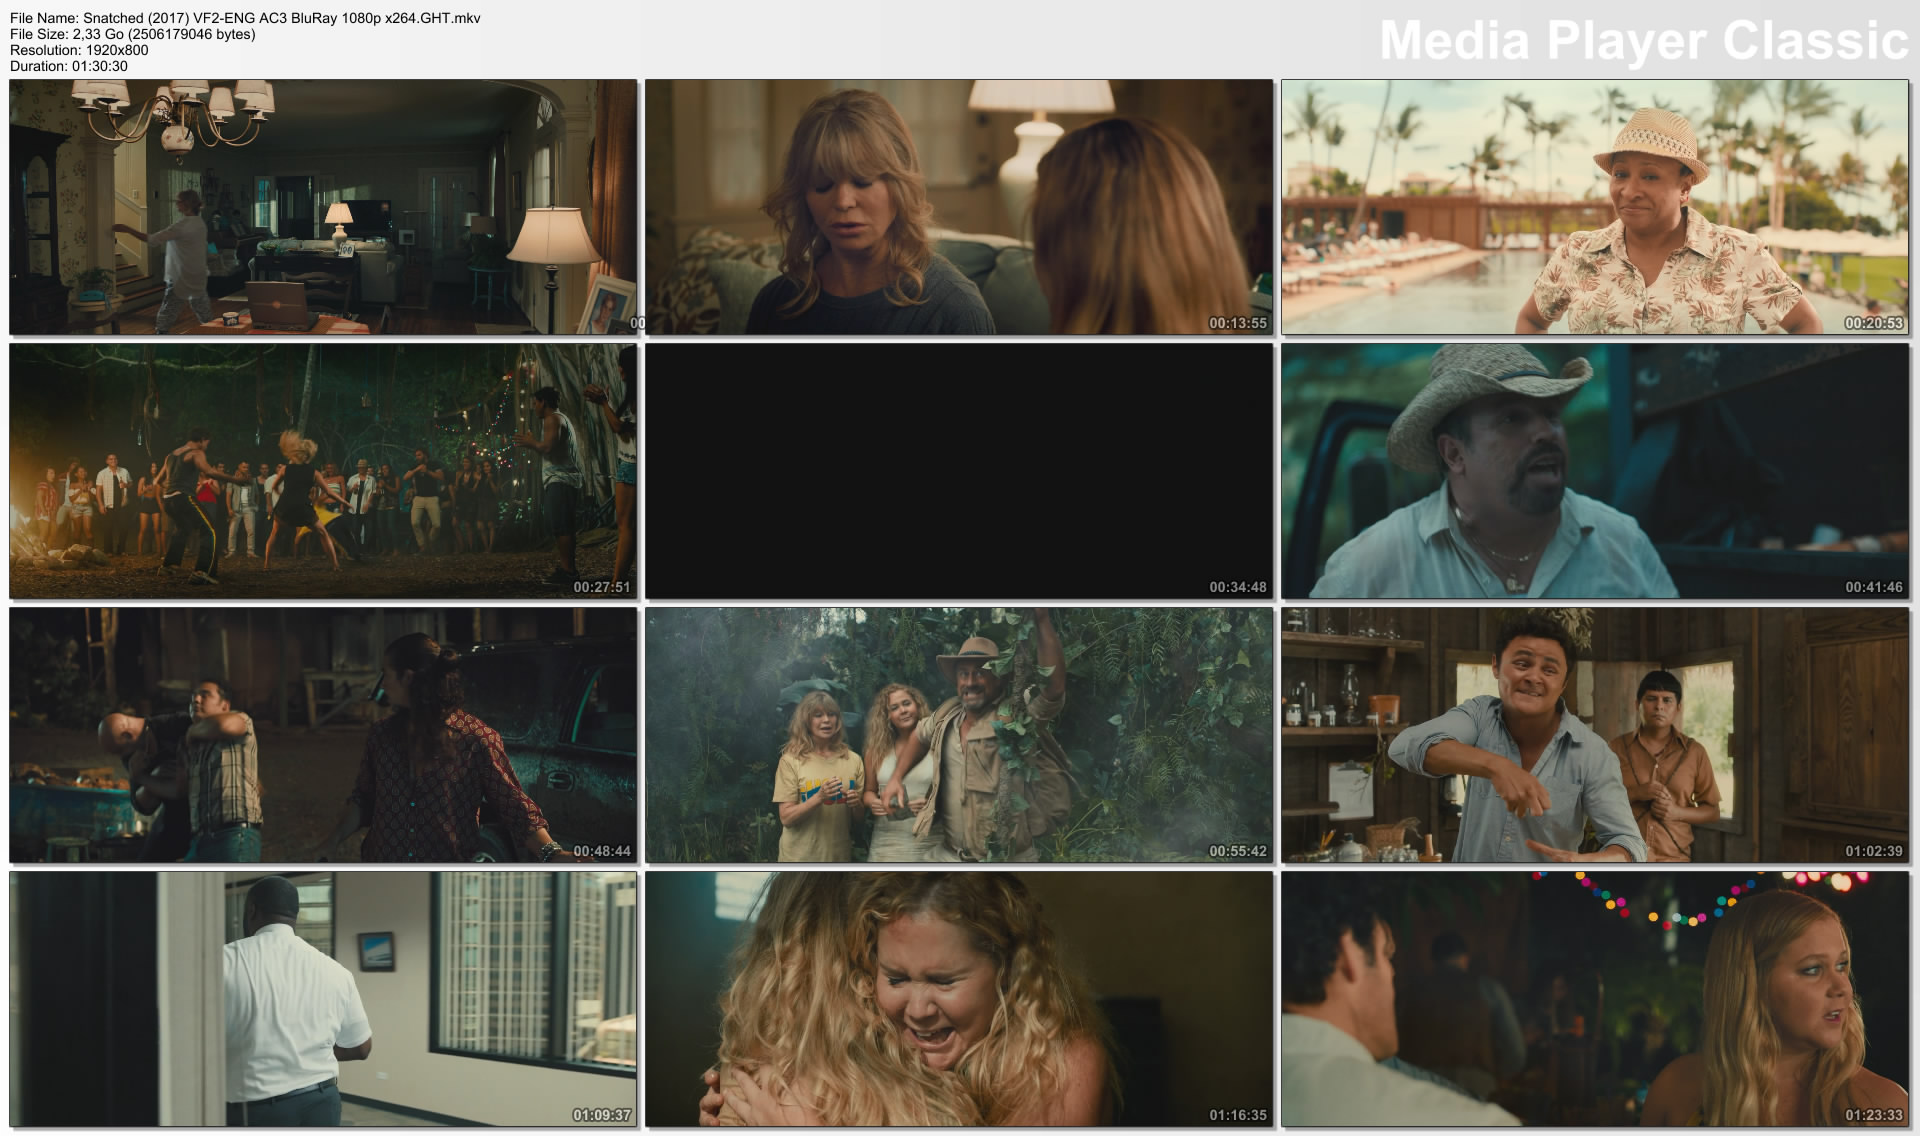 Snatched (2017) VF2-ENG AC3 BluRay 1080p x264.GHT